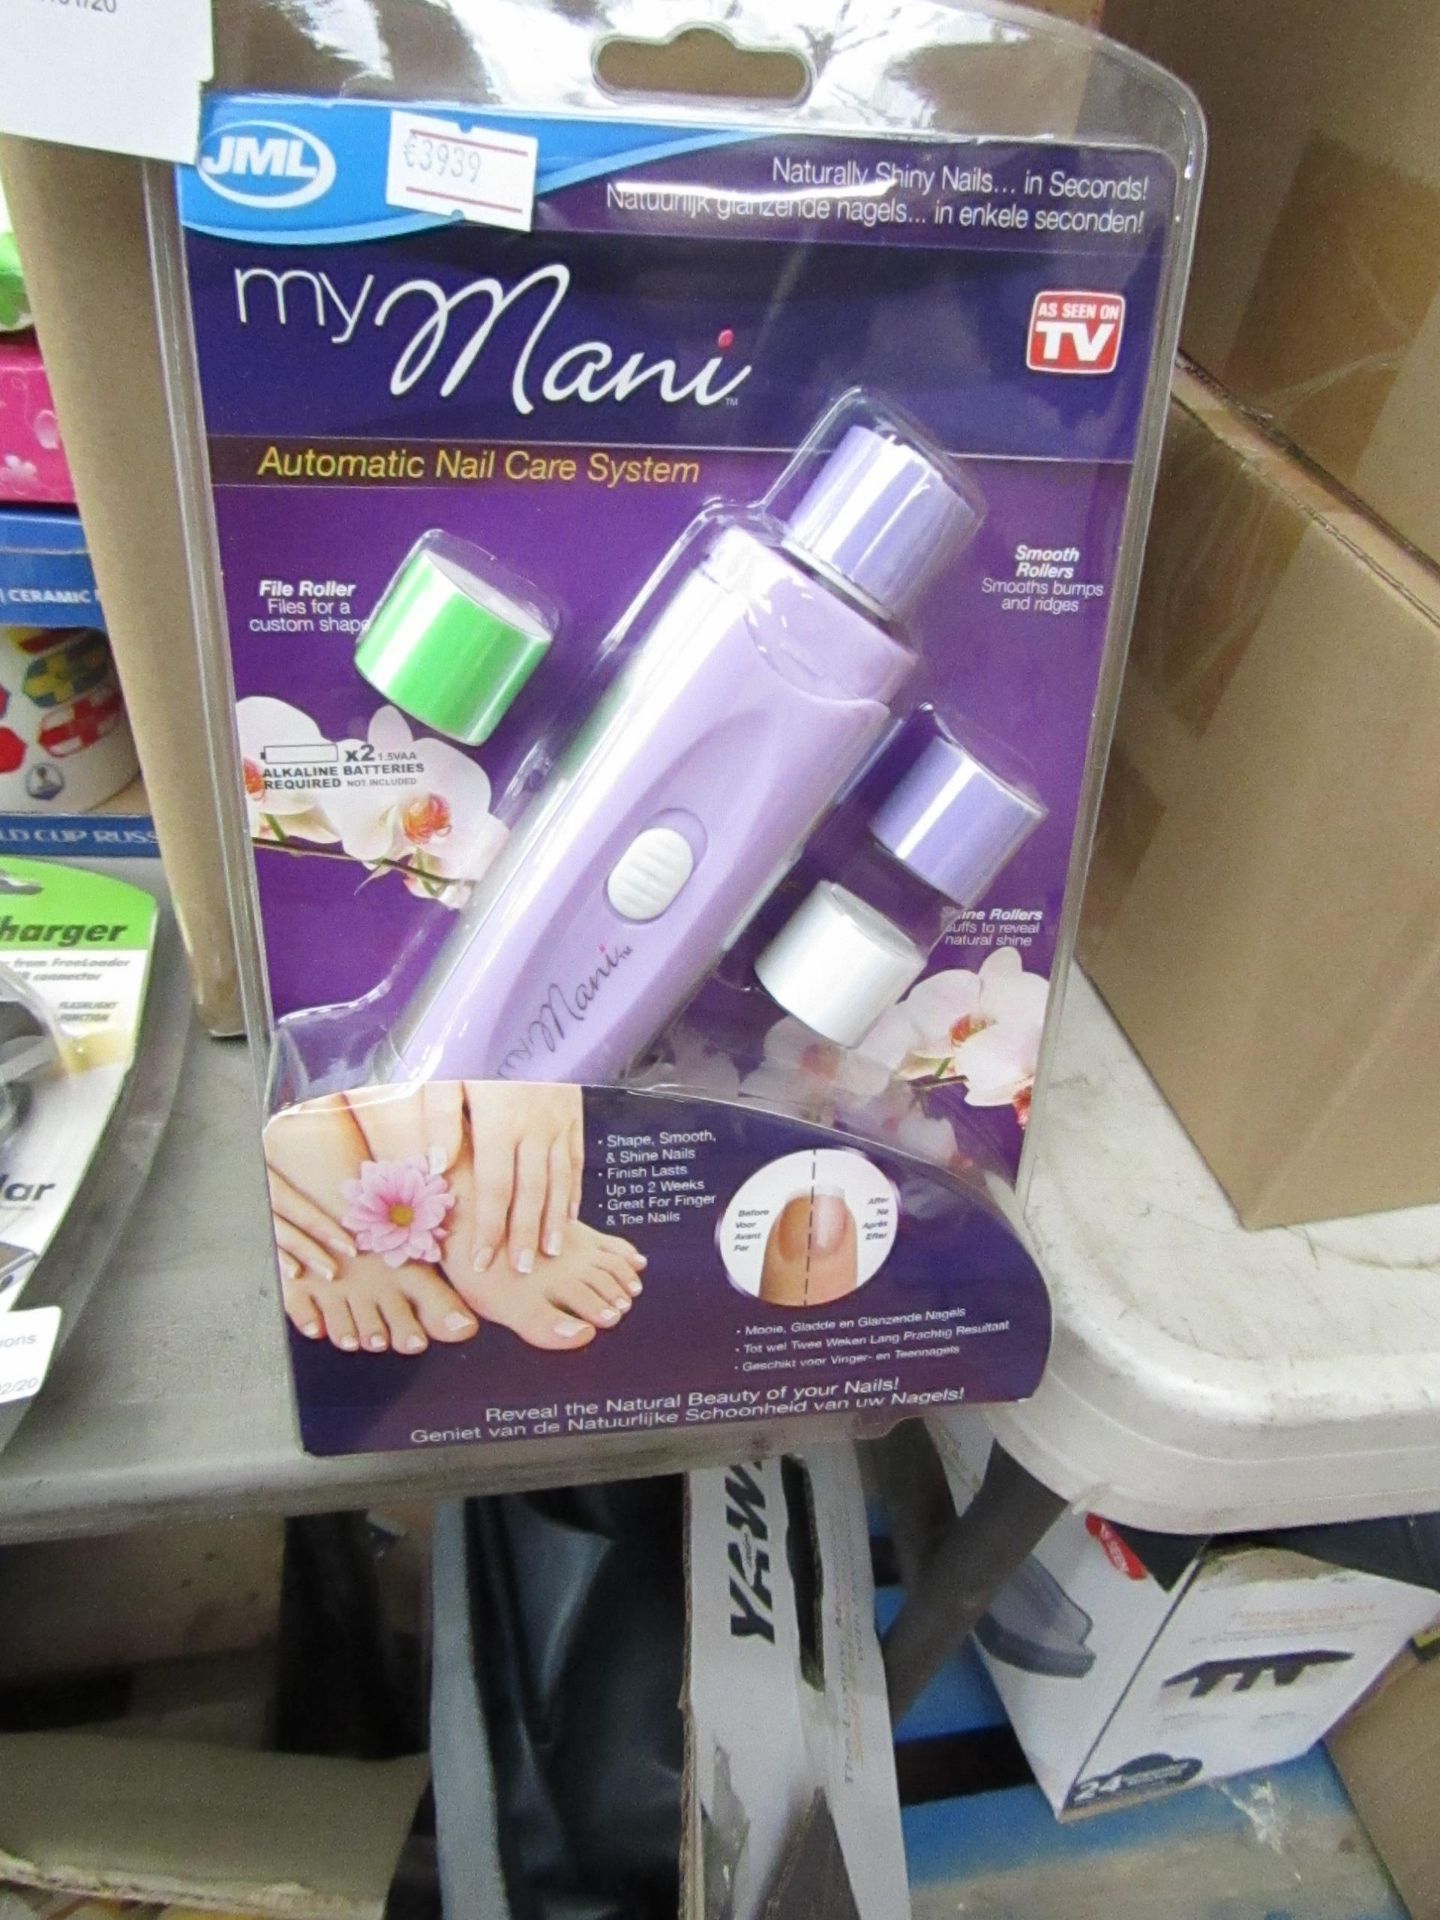 JML - My Nani - Automatic Nail Care System - New and packaged.